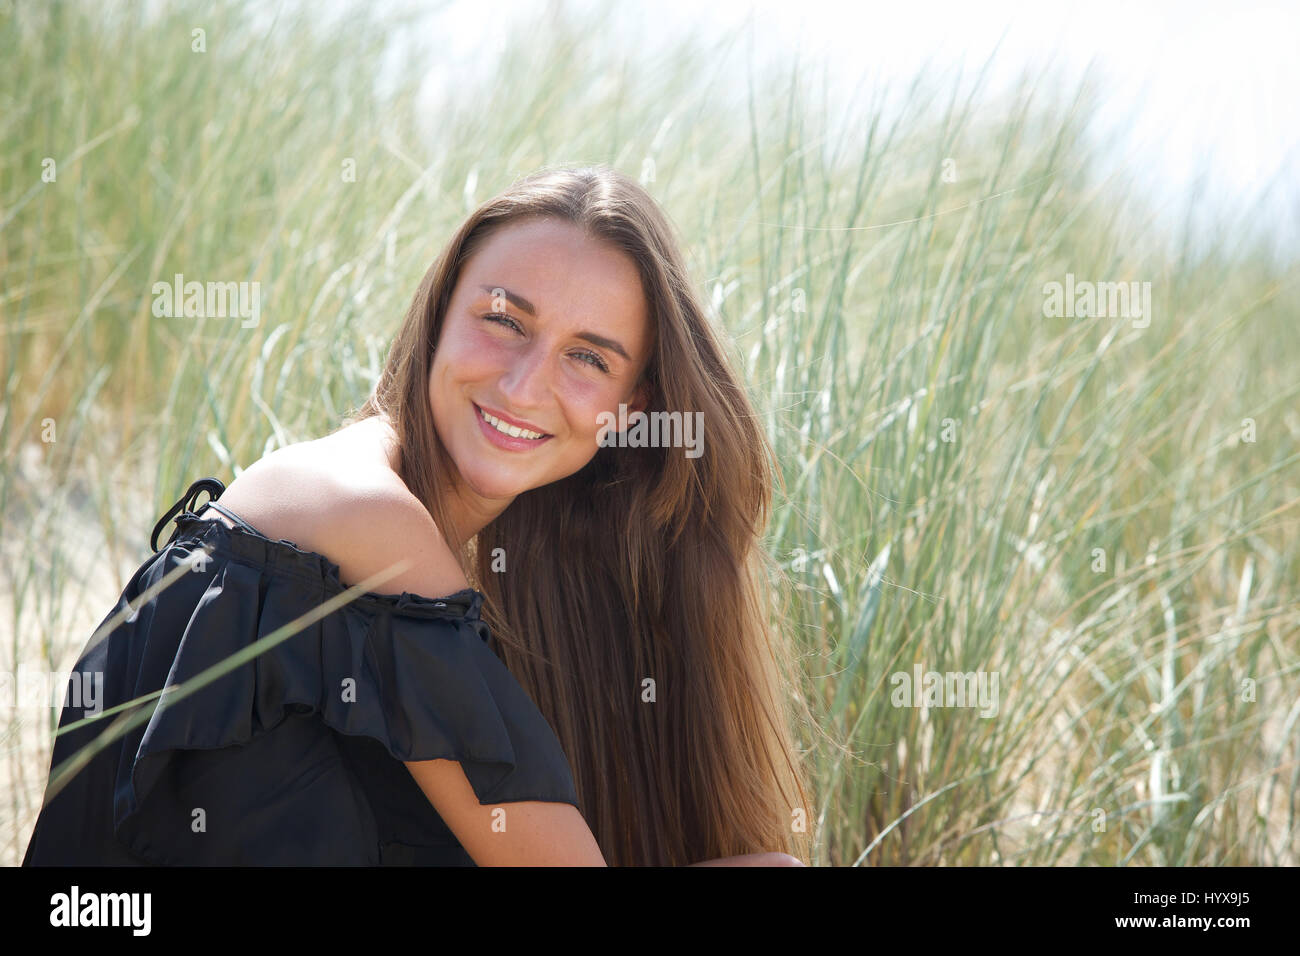 Close up portrait of a young woman smiling outdoors Stock Photo